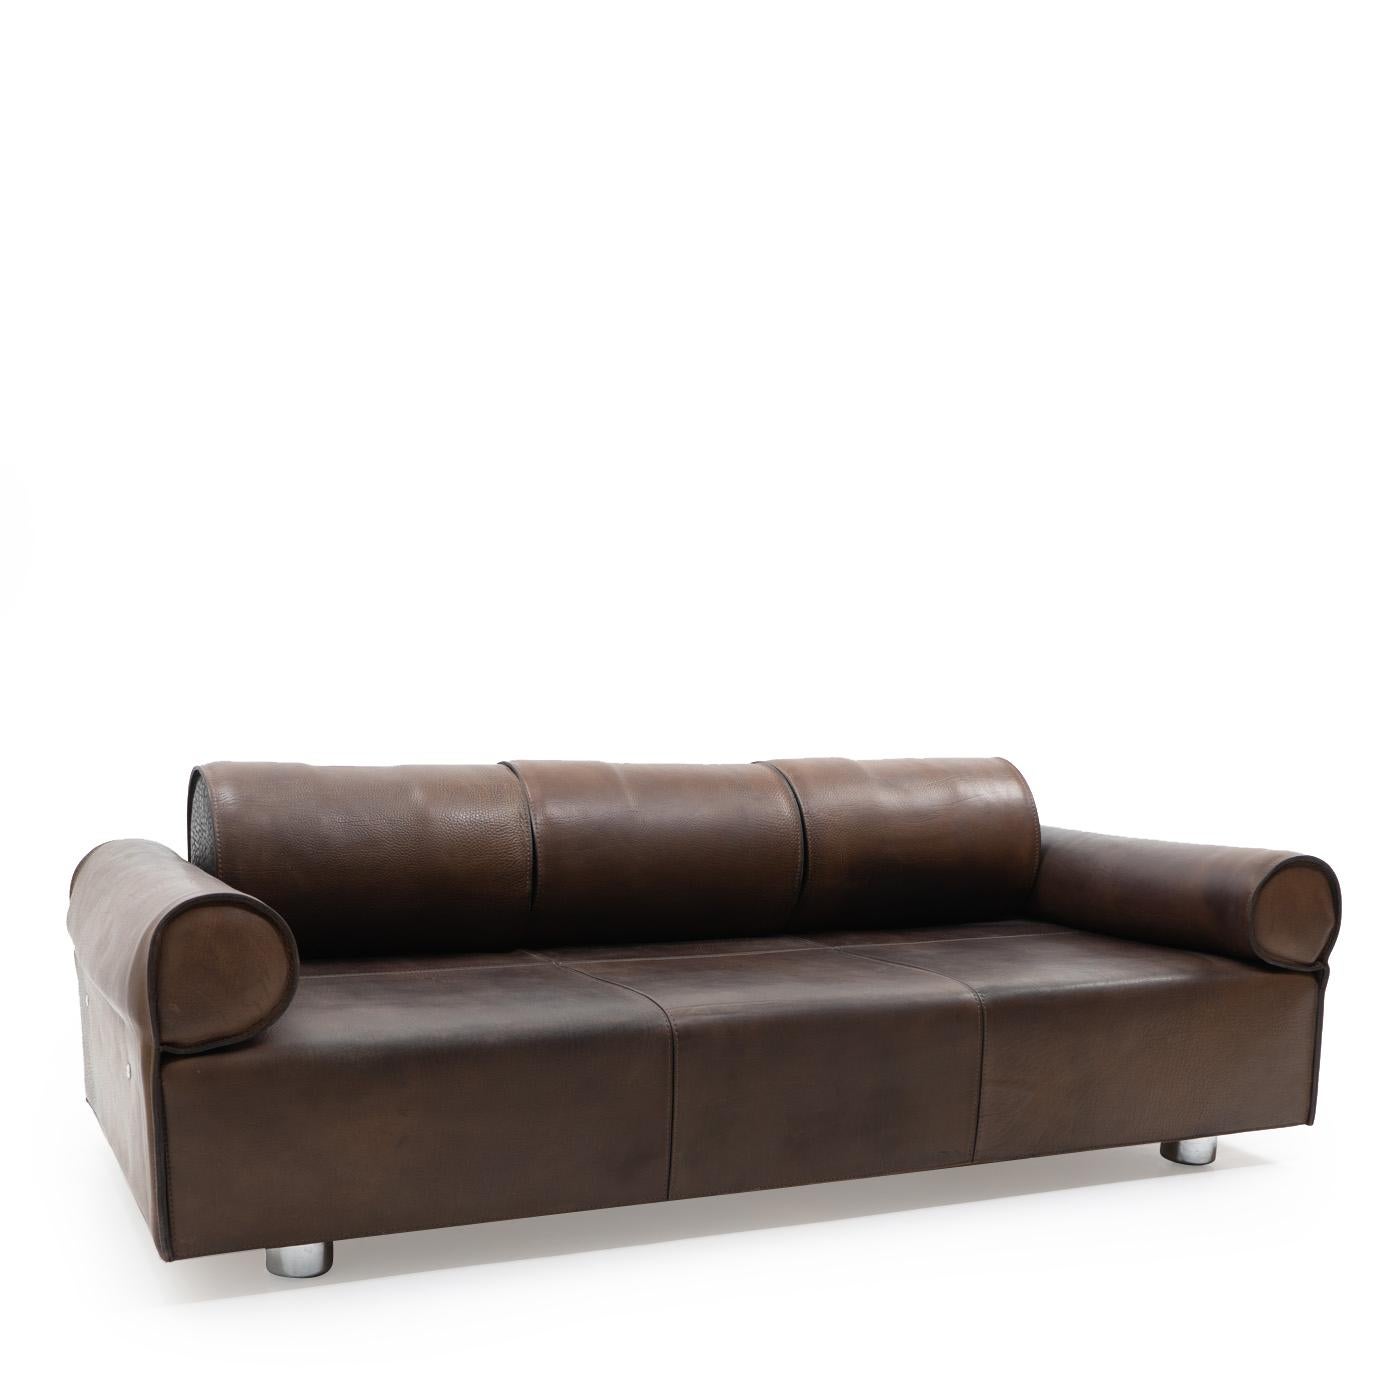 An exceptional three seater sofa, executed in thick and very heavy buffalo hide; the aged leather shows a wonderful deep dark-brown patina, it remains in excellent condition, with some discolouration and normal signs of use.

The sofa can be